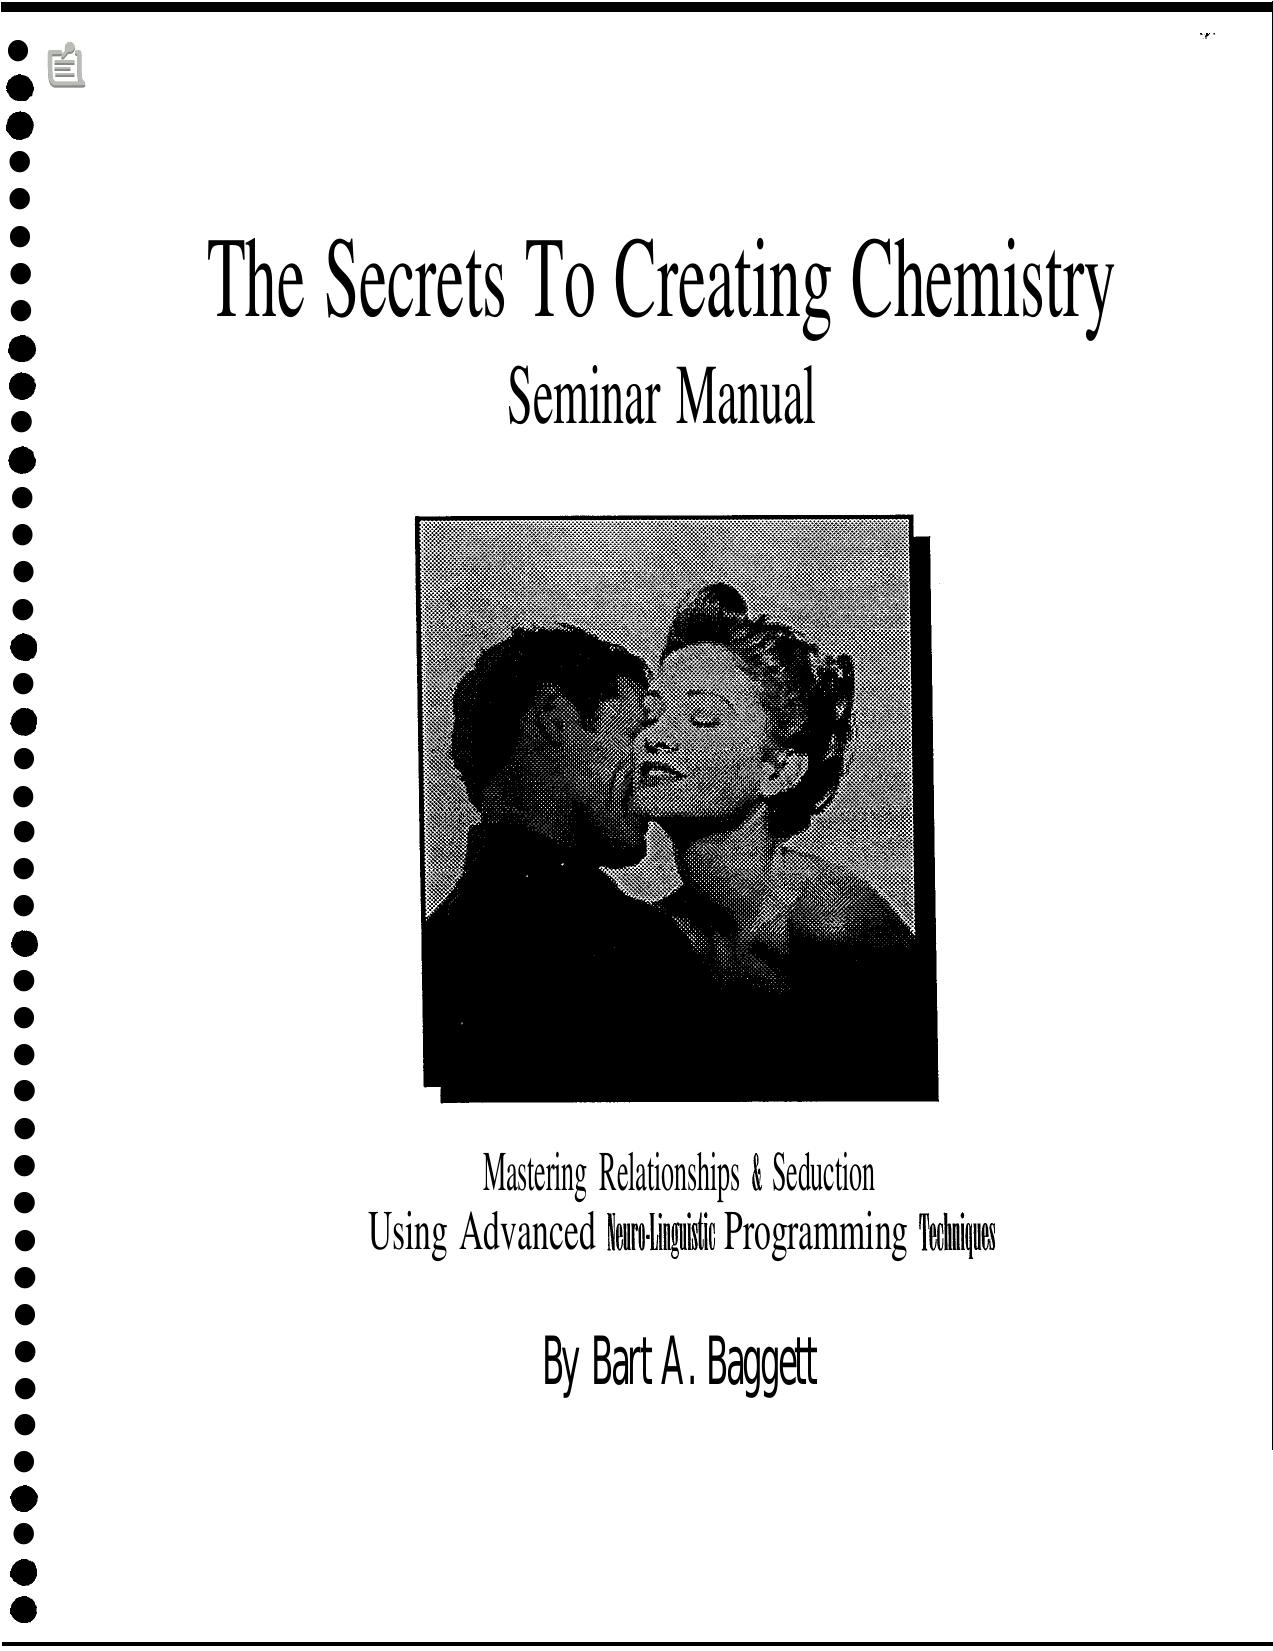 Secrets To Creating chemistry Manual